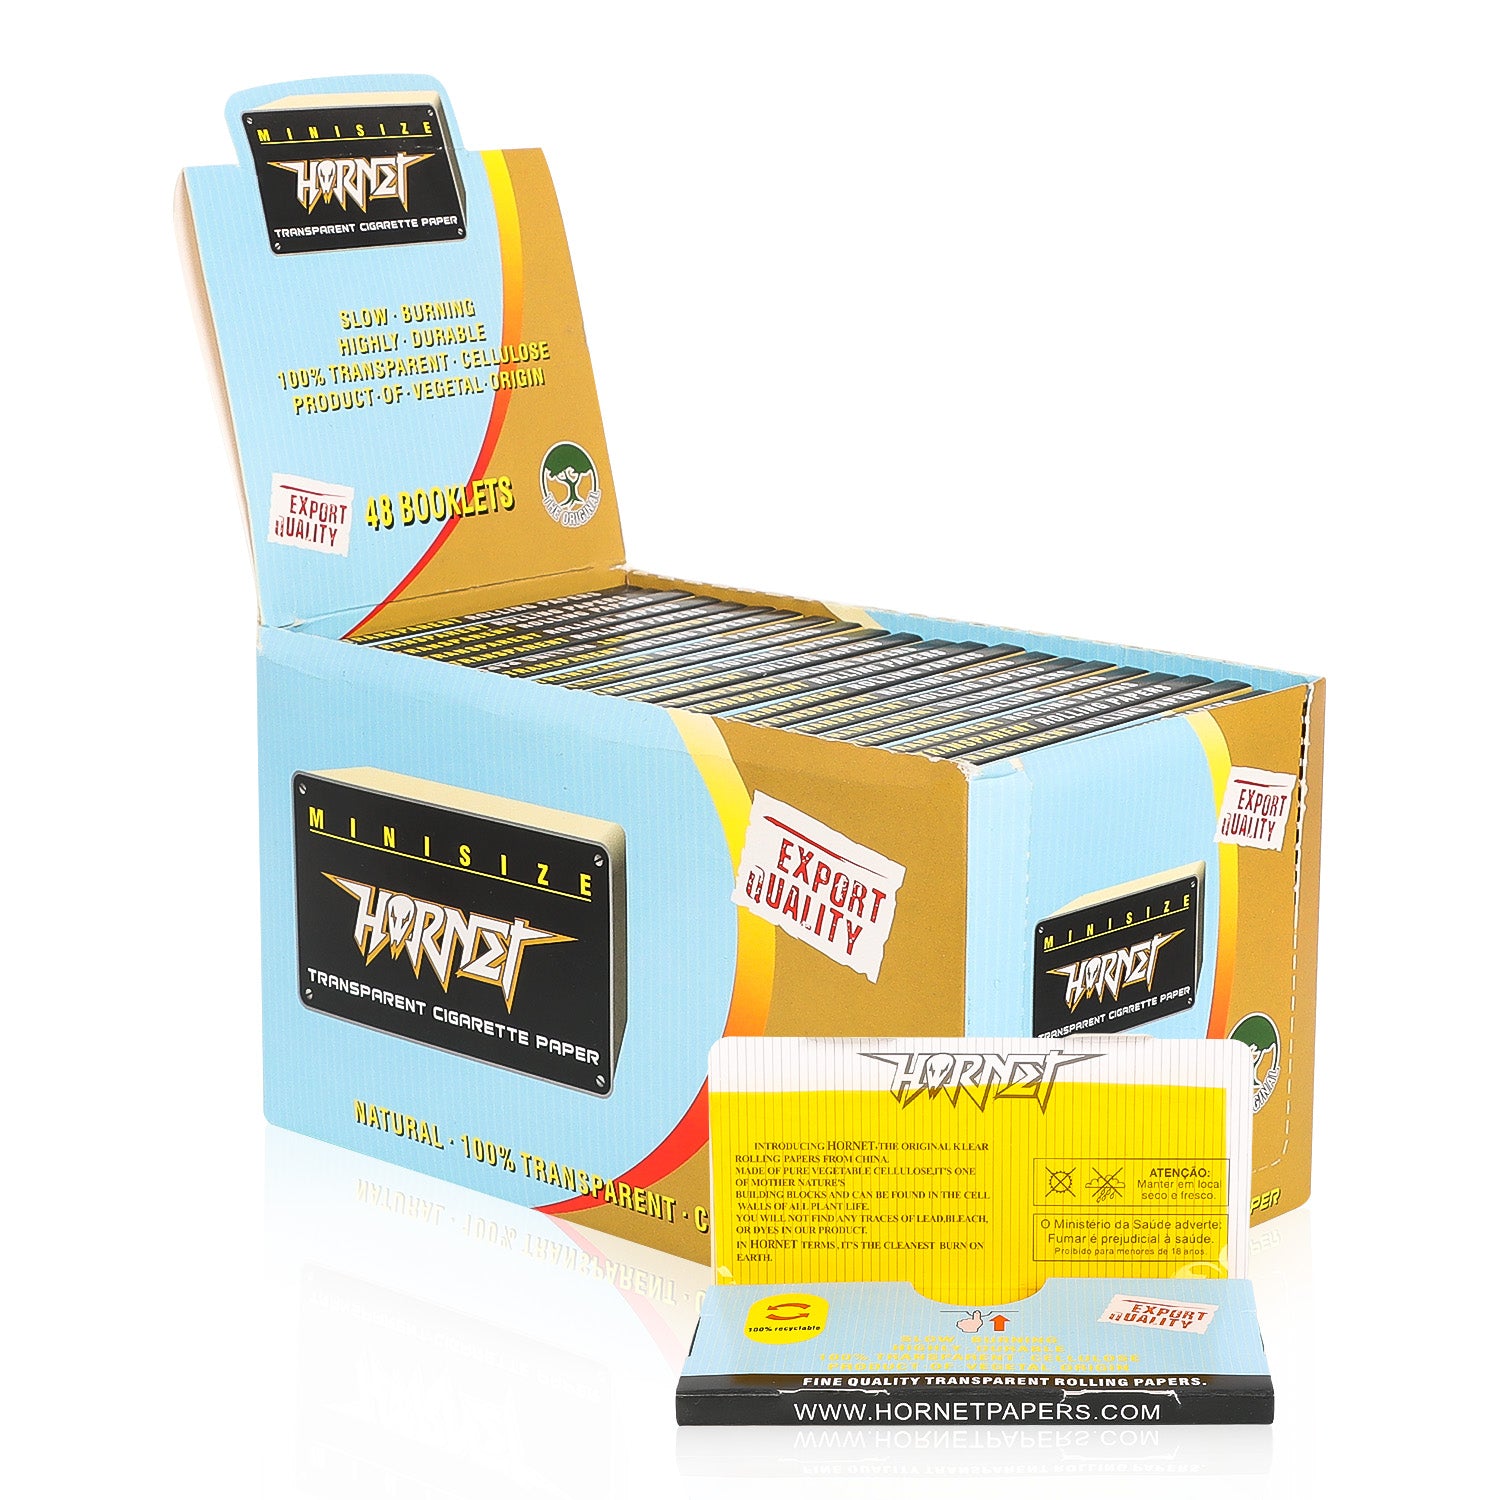 HORNET Gold Transparent Cellulose Rolling Papers, 1 1/4 Size Clear Rolling Paper, 50 Pieces / Pack 48 Packs / Box